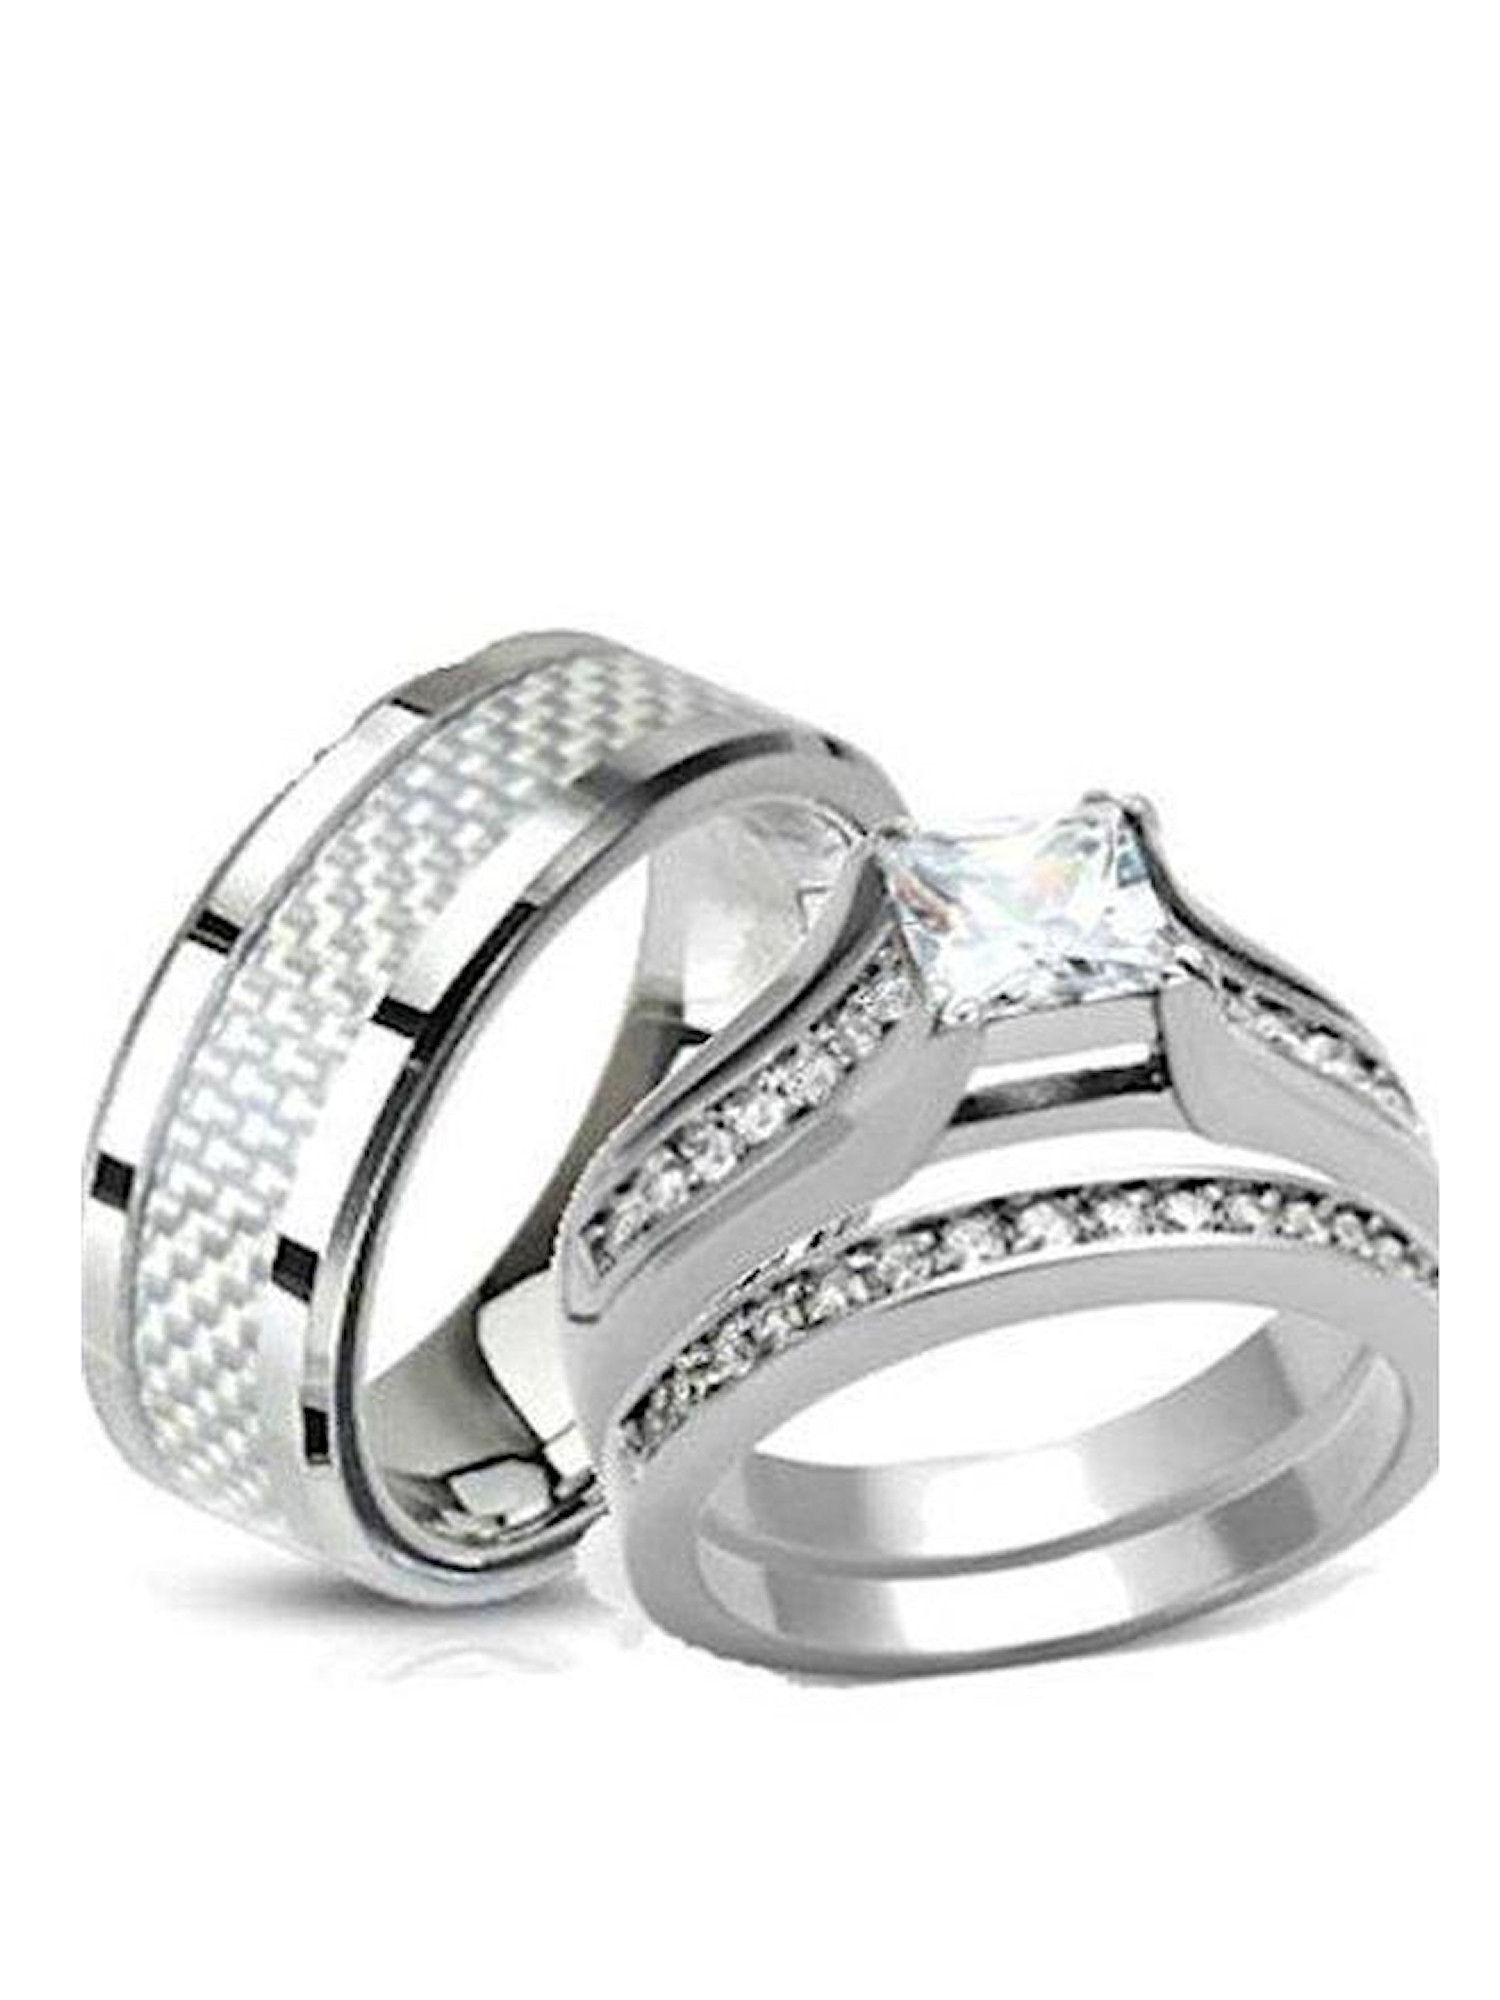 Walmart His And Hers Wedding Rings
 His and Hers Wedding Rings Stainless Steel Princess Cut CZ